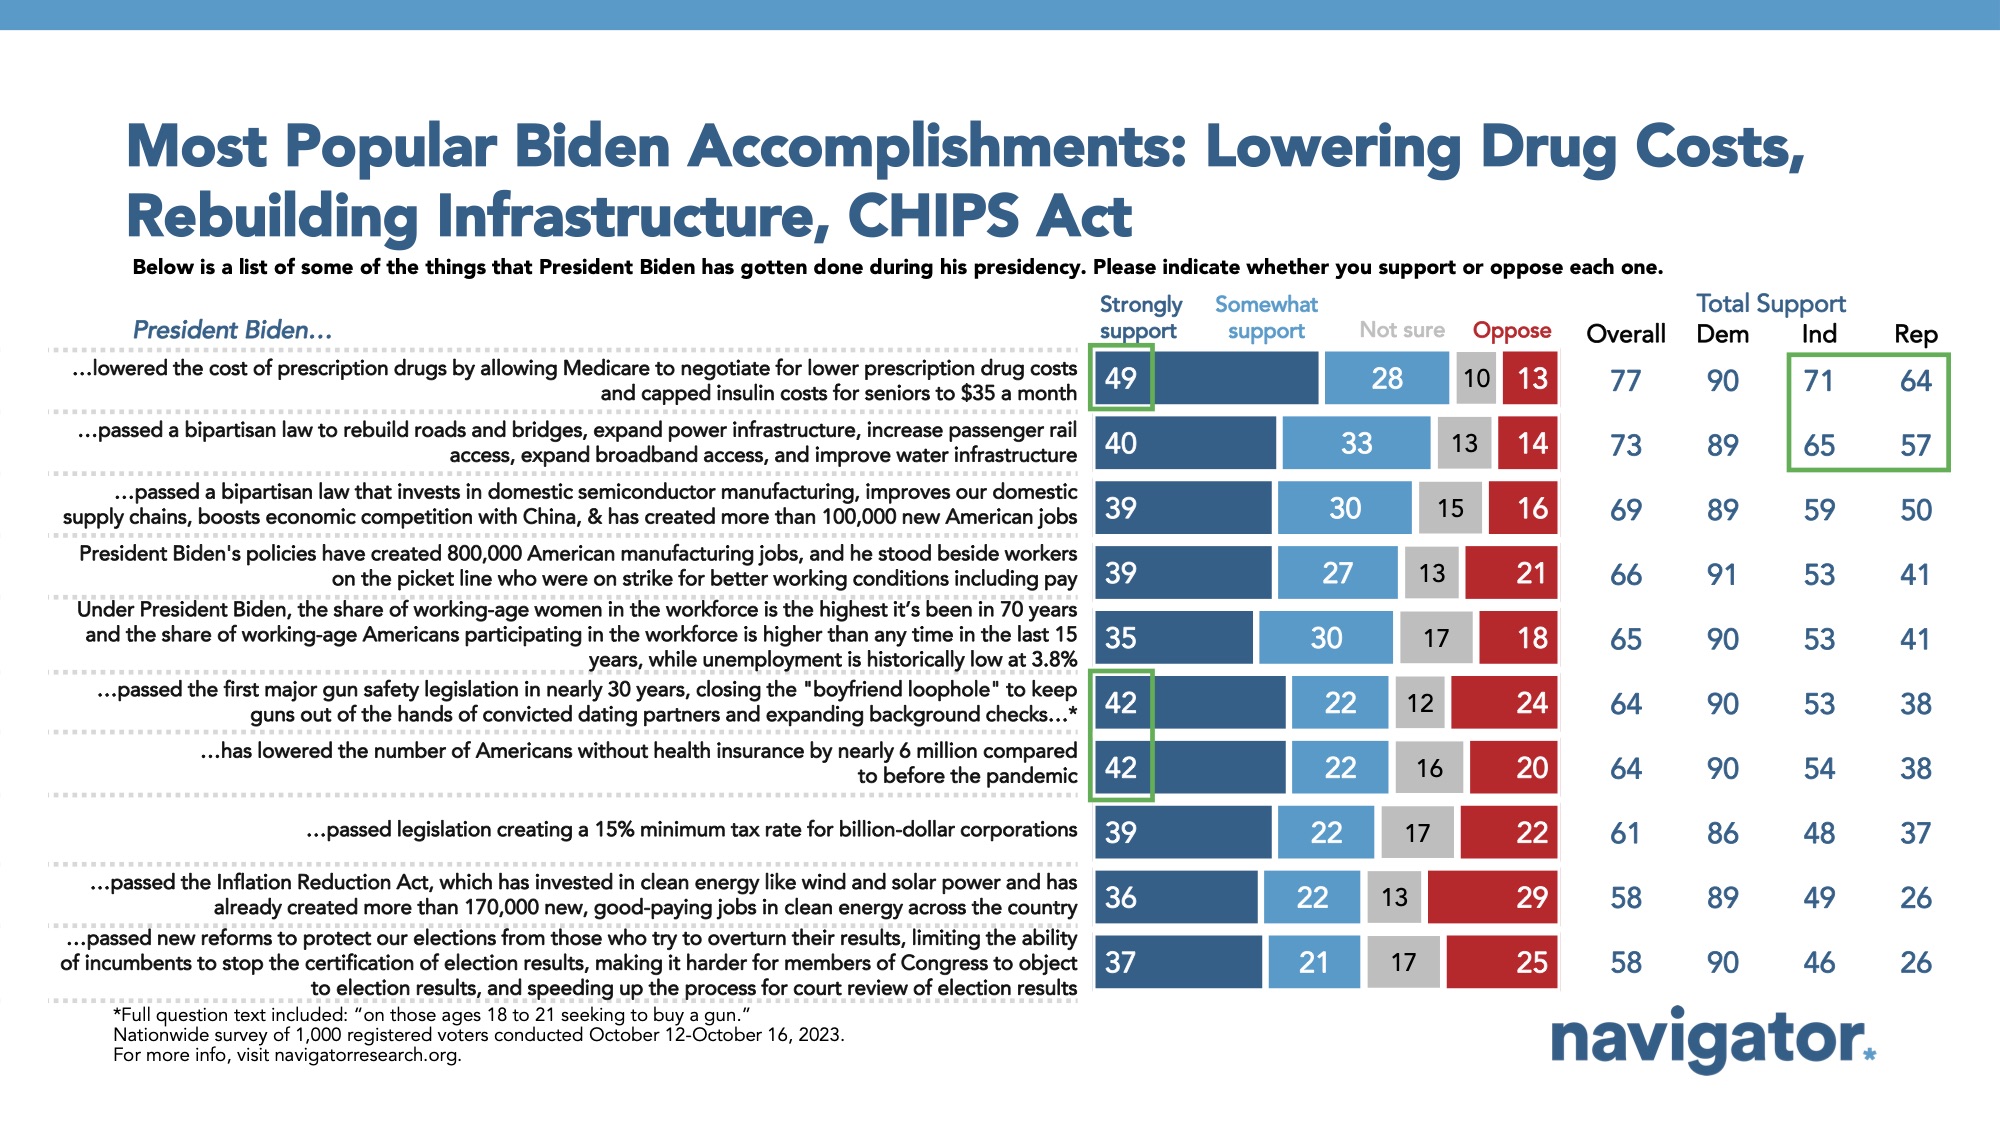 Bar graph of polling data from Navigator Research titled "Most Popular Biden Accomplishment: Lowering Drug Costs, Rebuilding Infrastructure, CHIPS Act